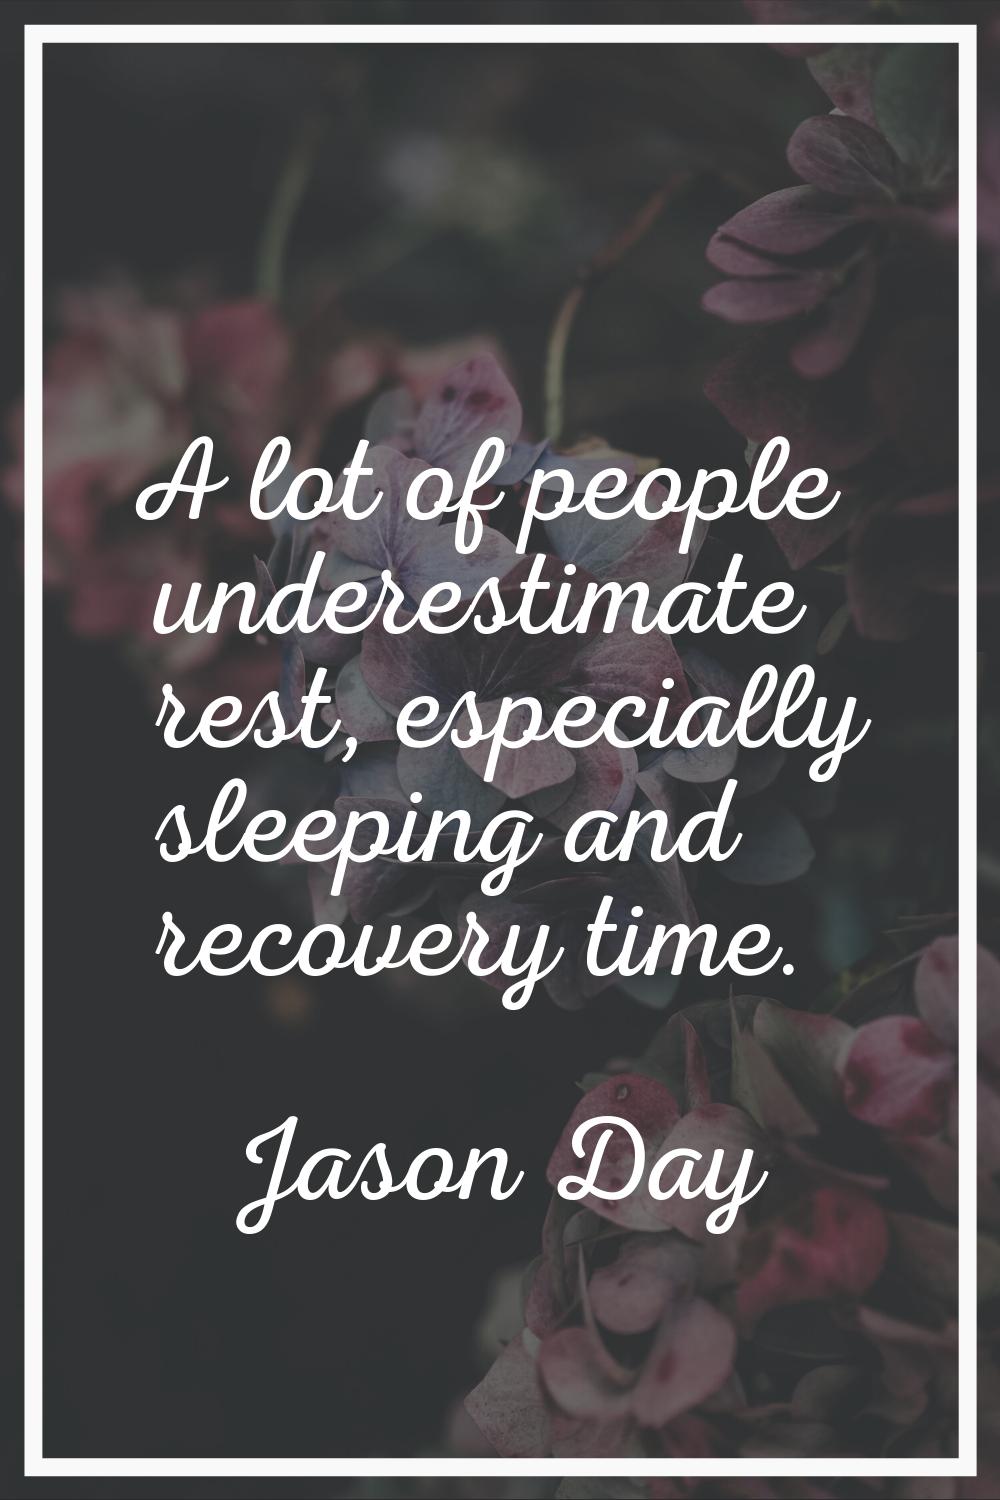 A lot of people underestimate rest, especially sleeping and recovery time.